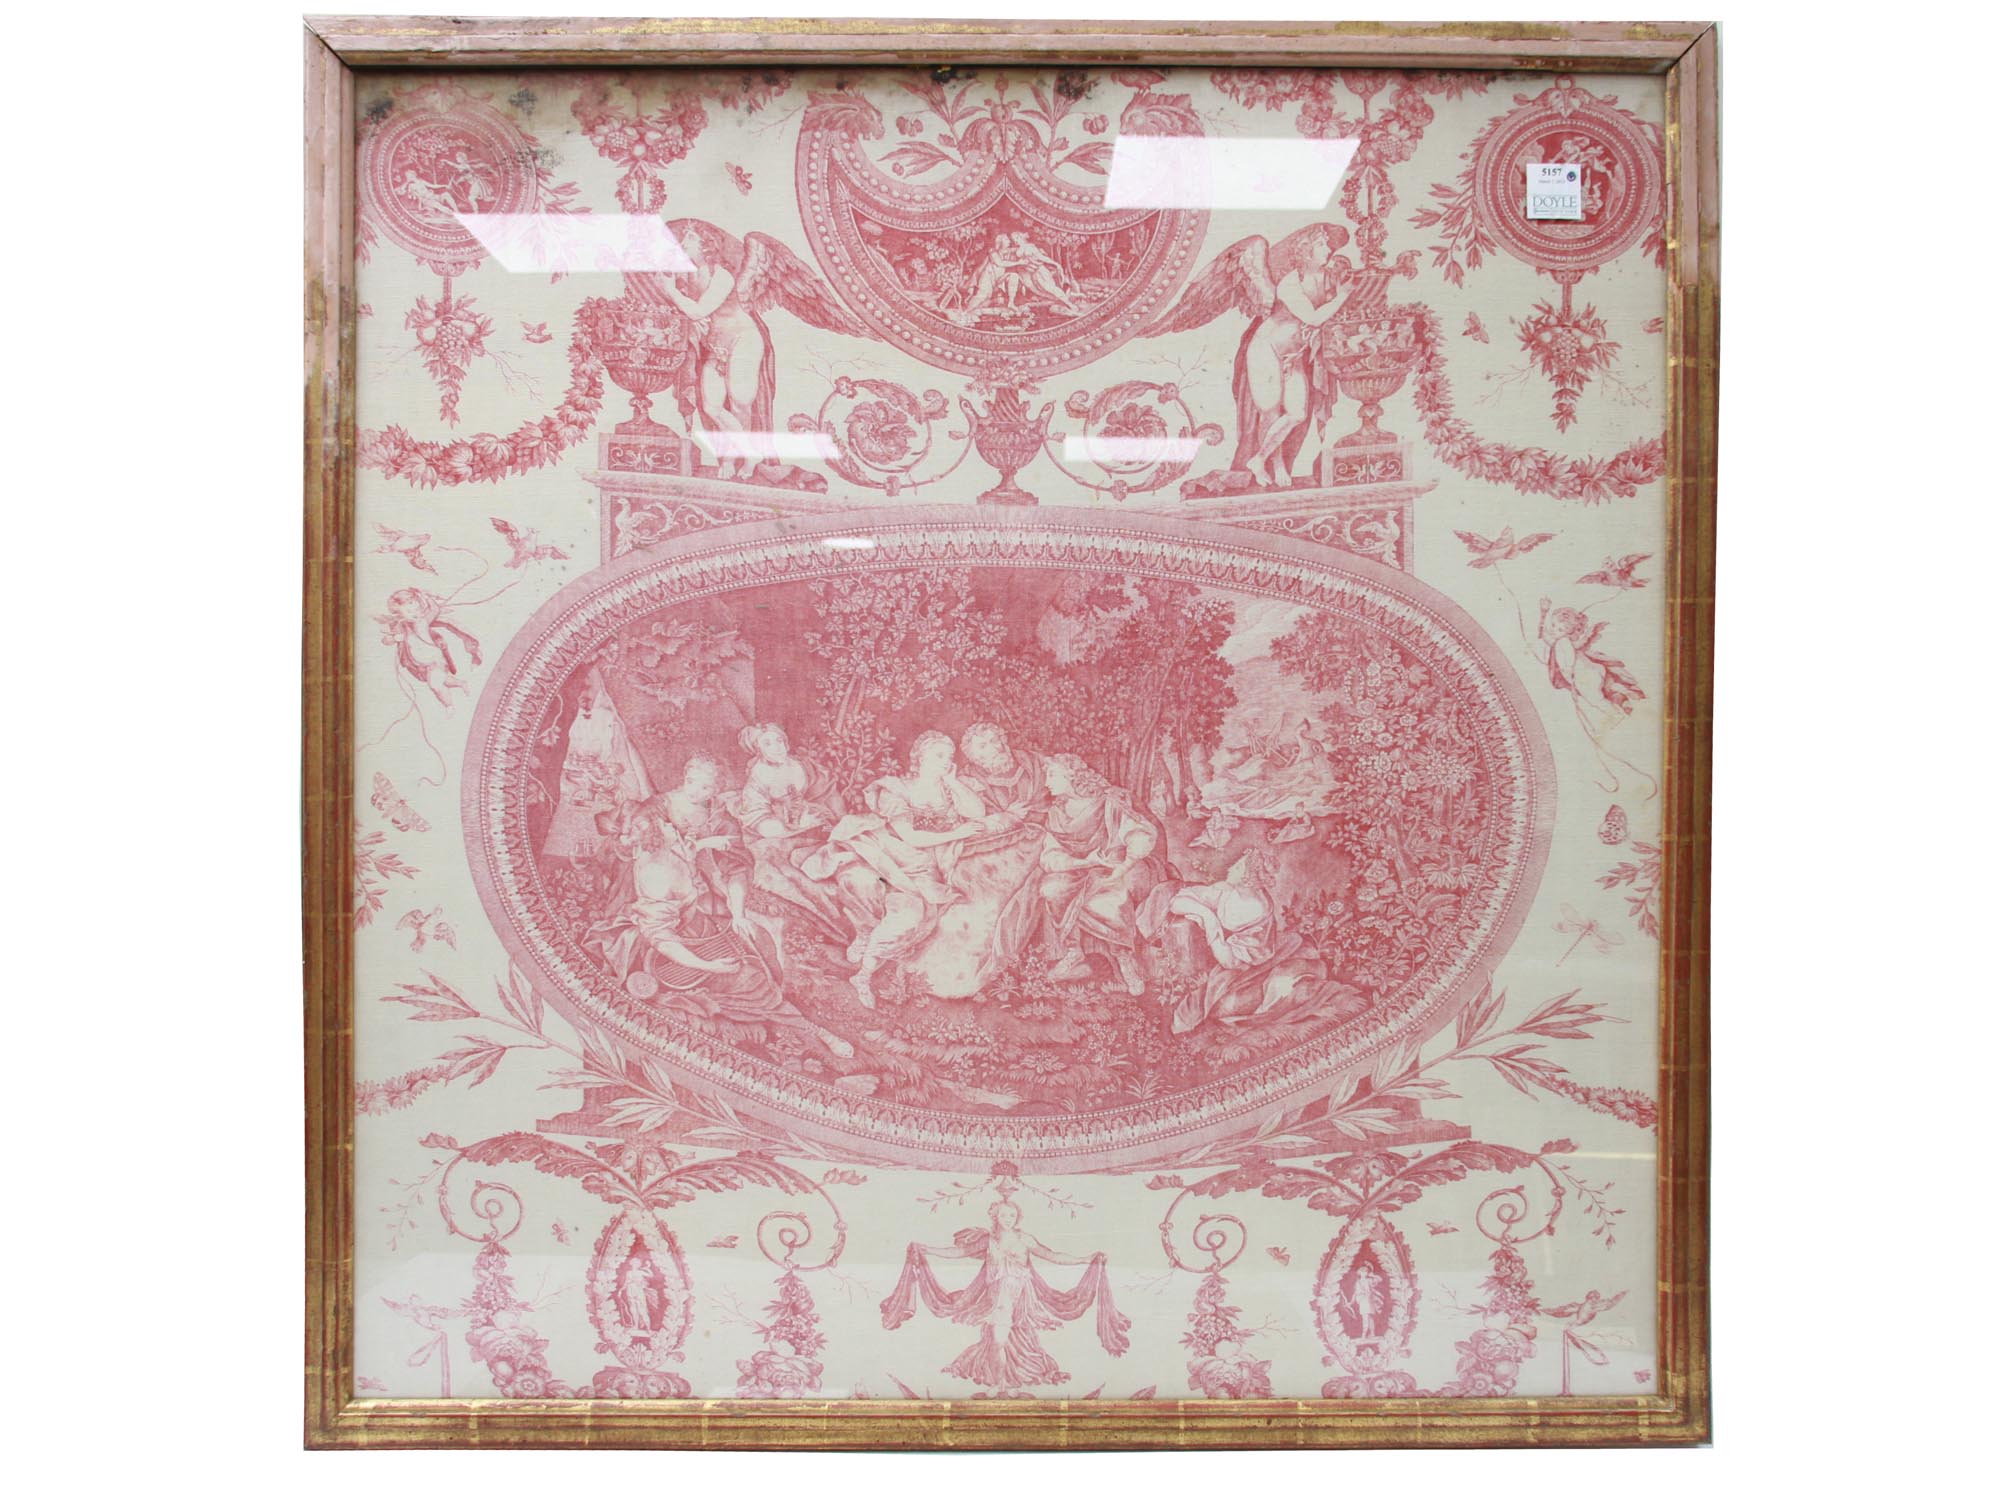 19TH CENTURY FRENCH TOILE DE JOUY FABRIC PANEL PIC-0